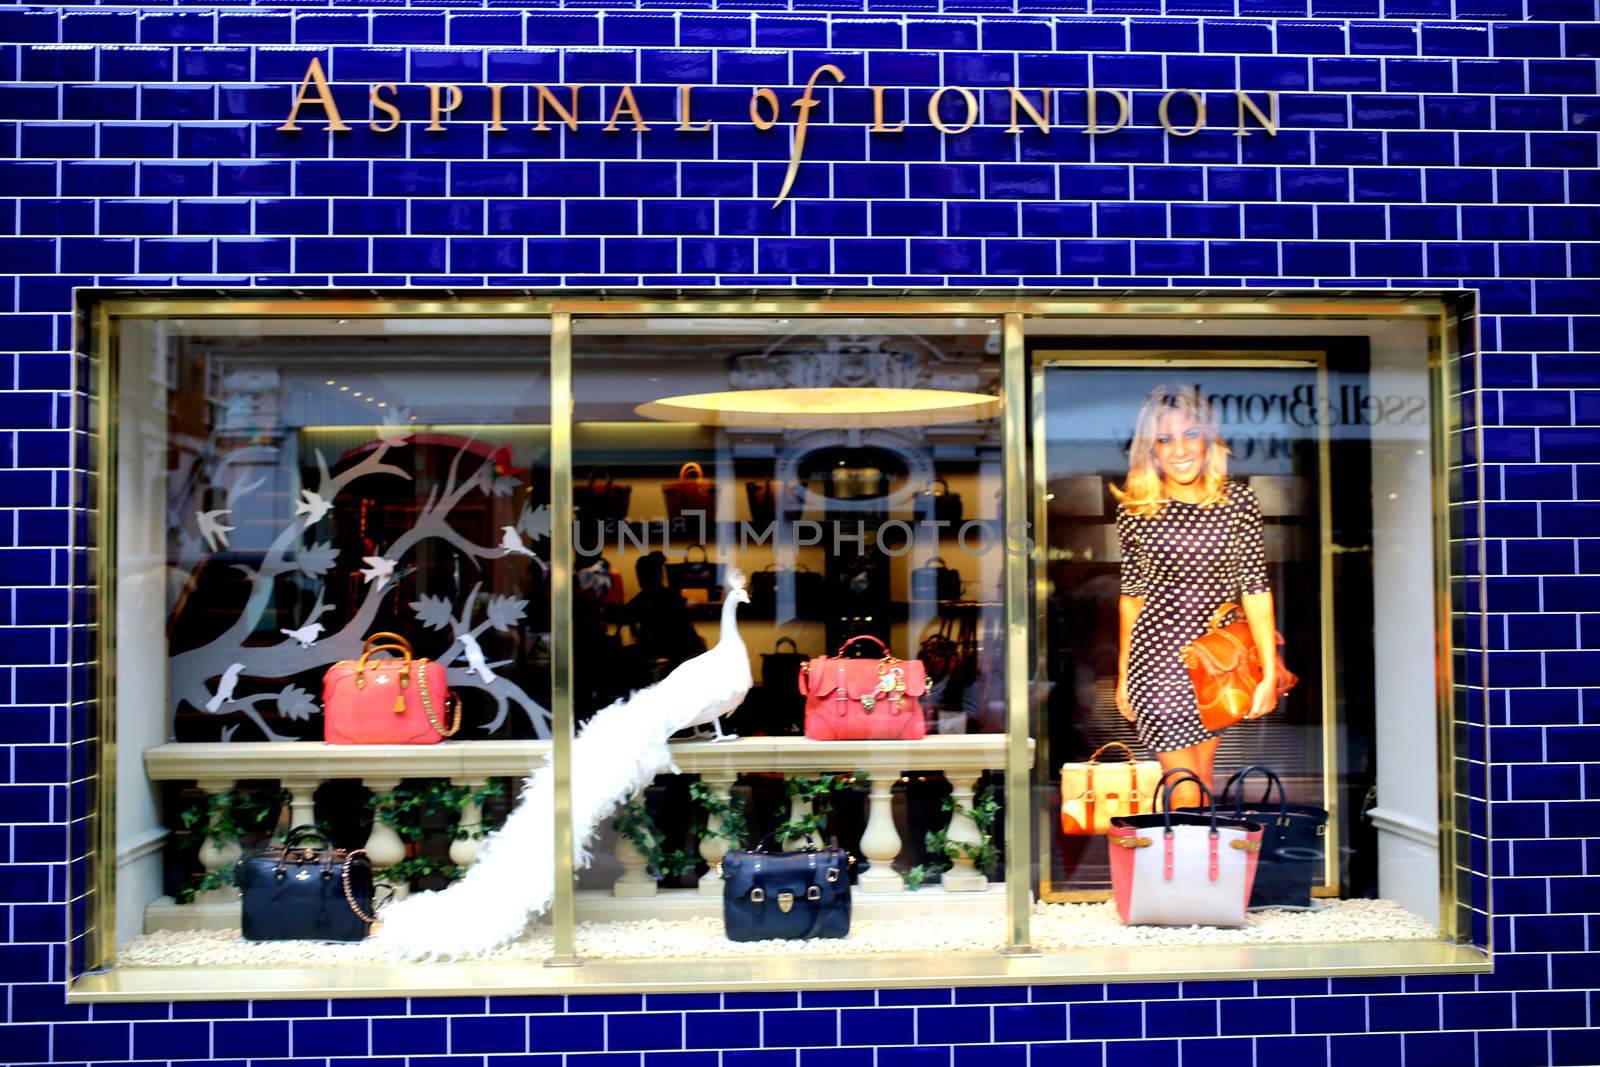 Aspinal Shop Front by Whiteboxmedia